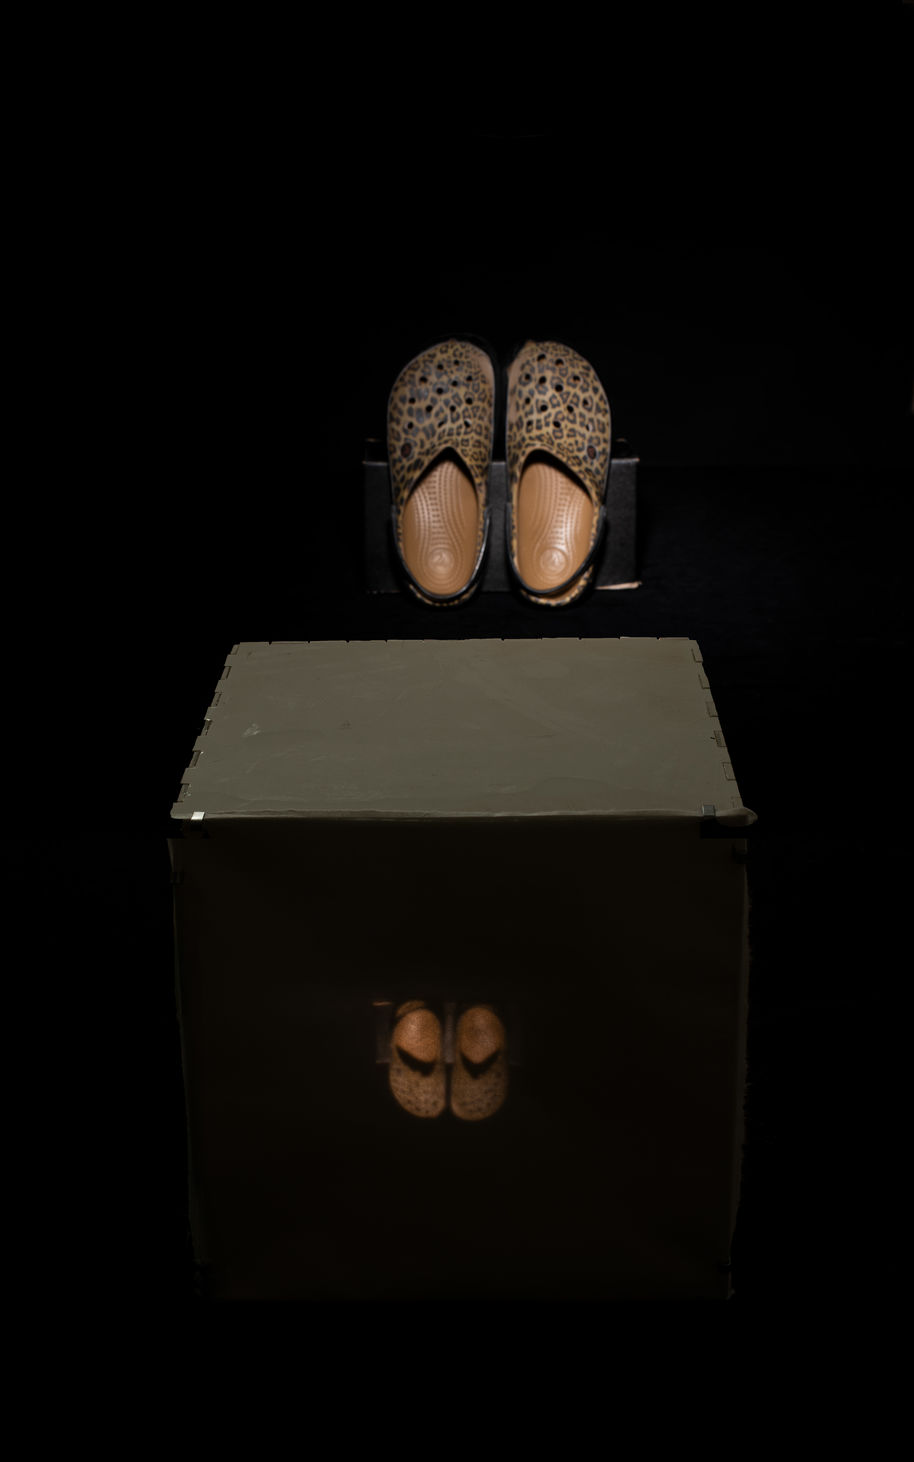 Workshoes projected on a surface by camera obscura technique